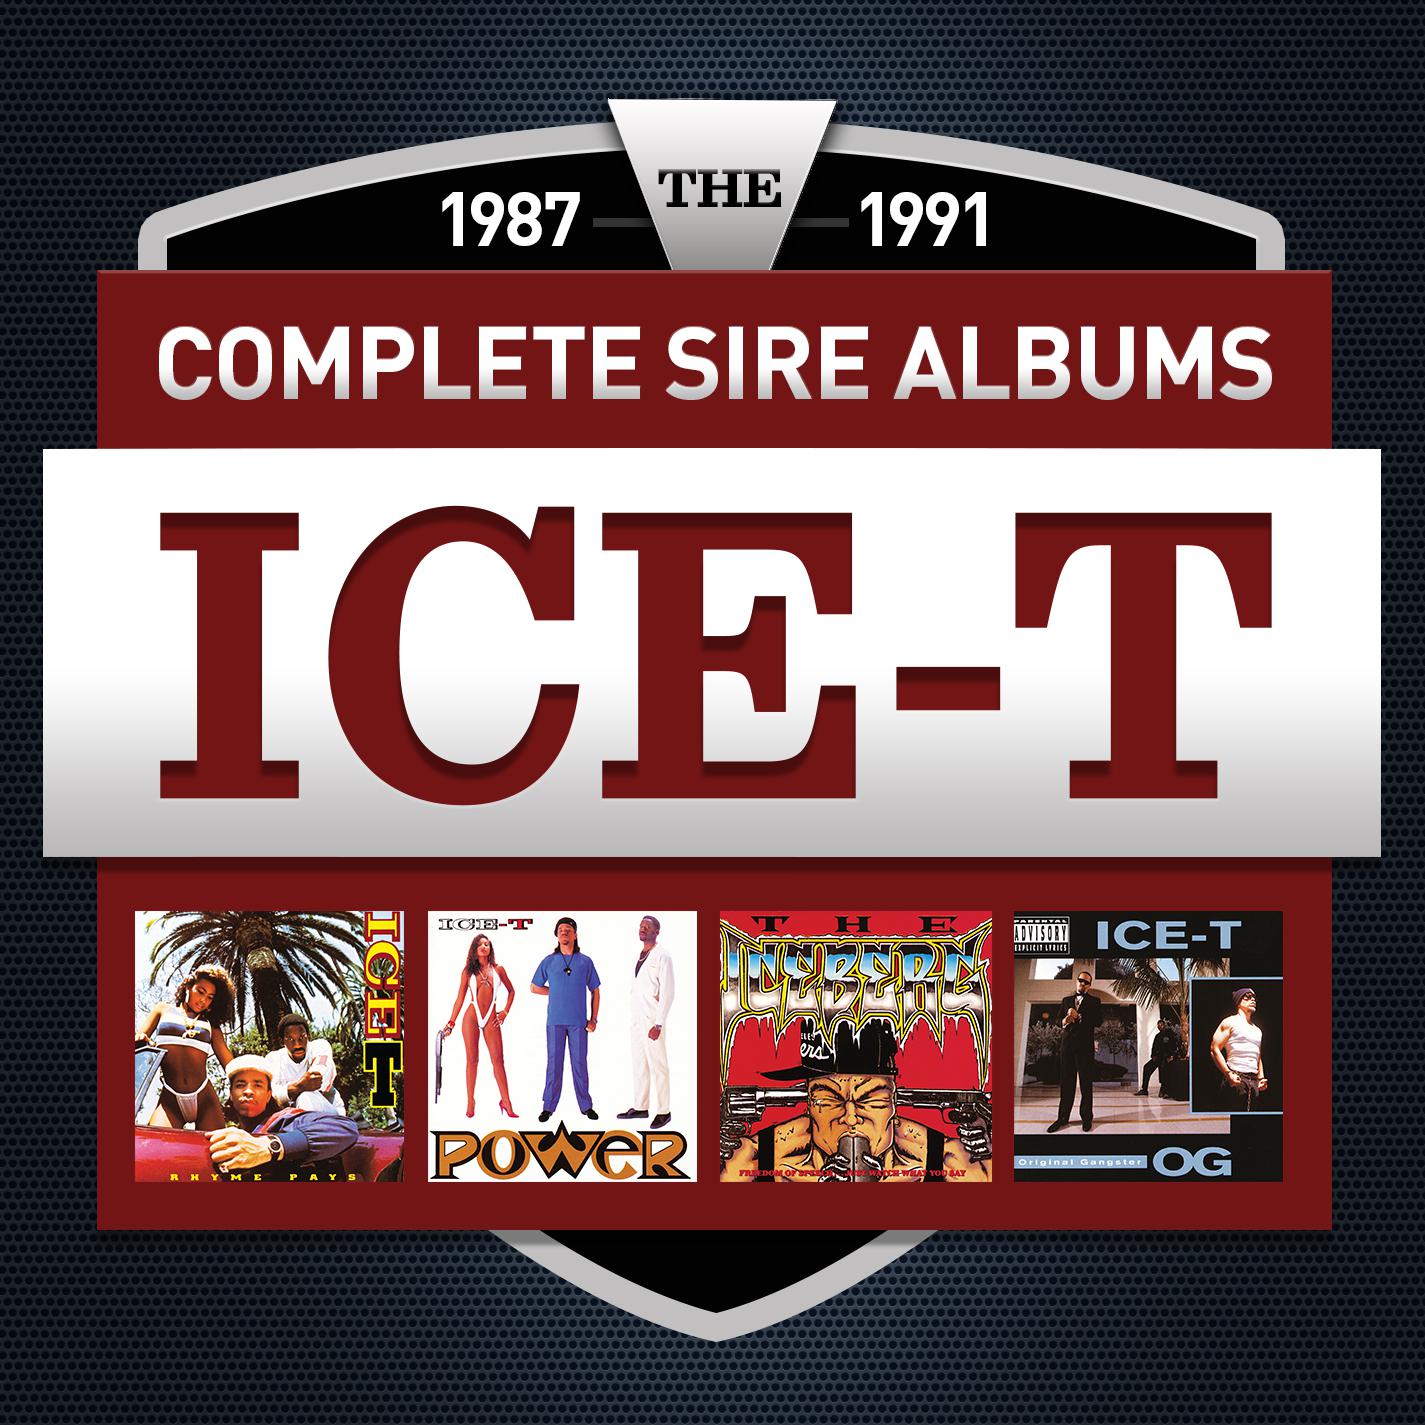 The Complete Sire Albums 1987 - 1991